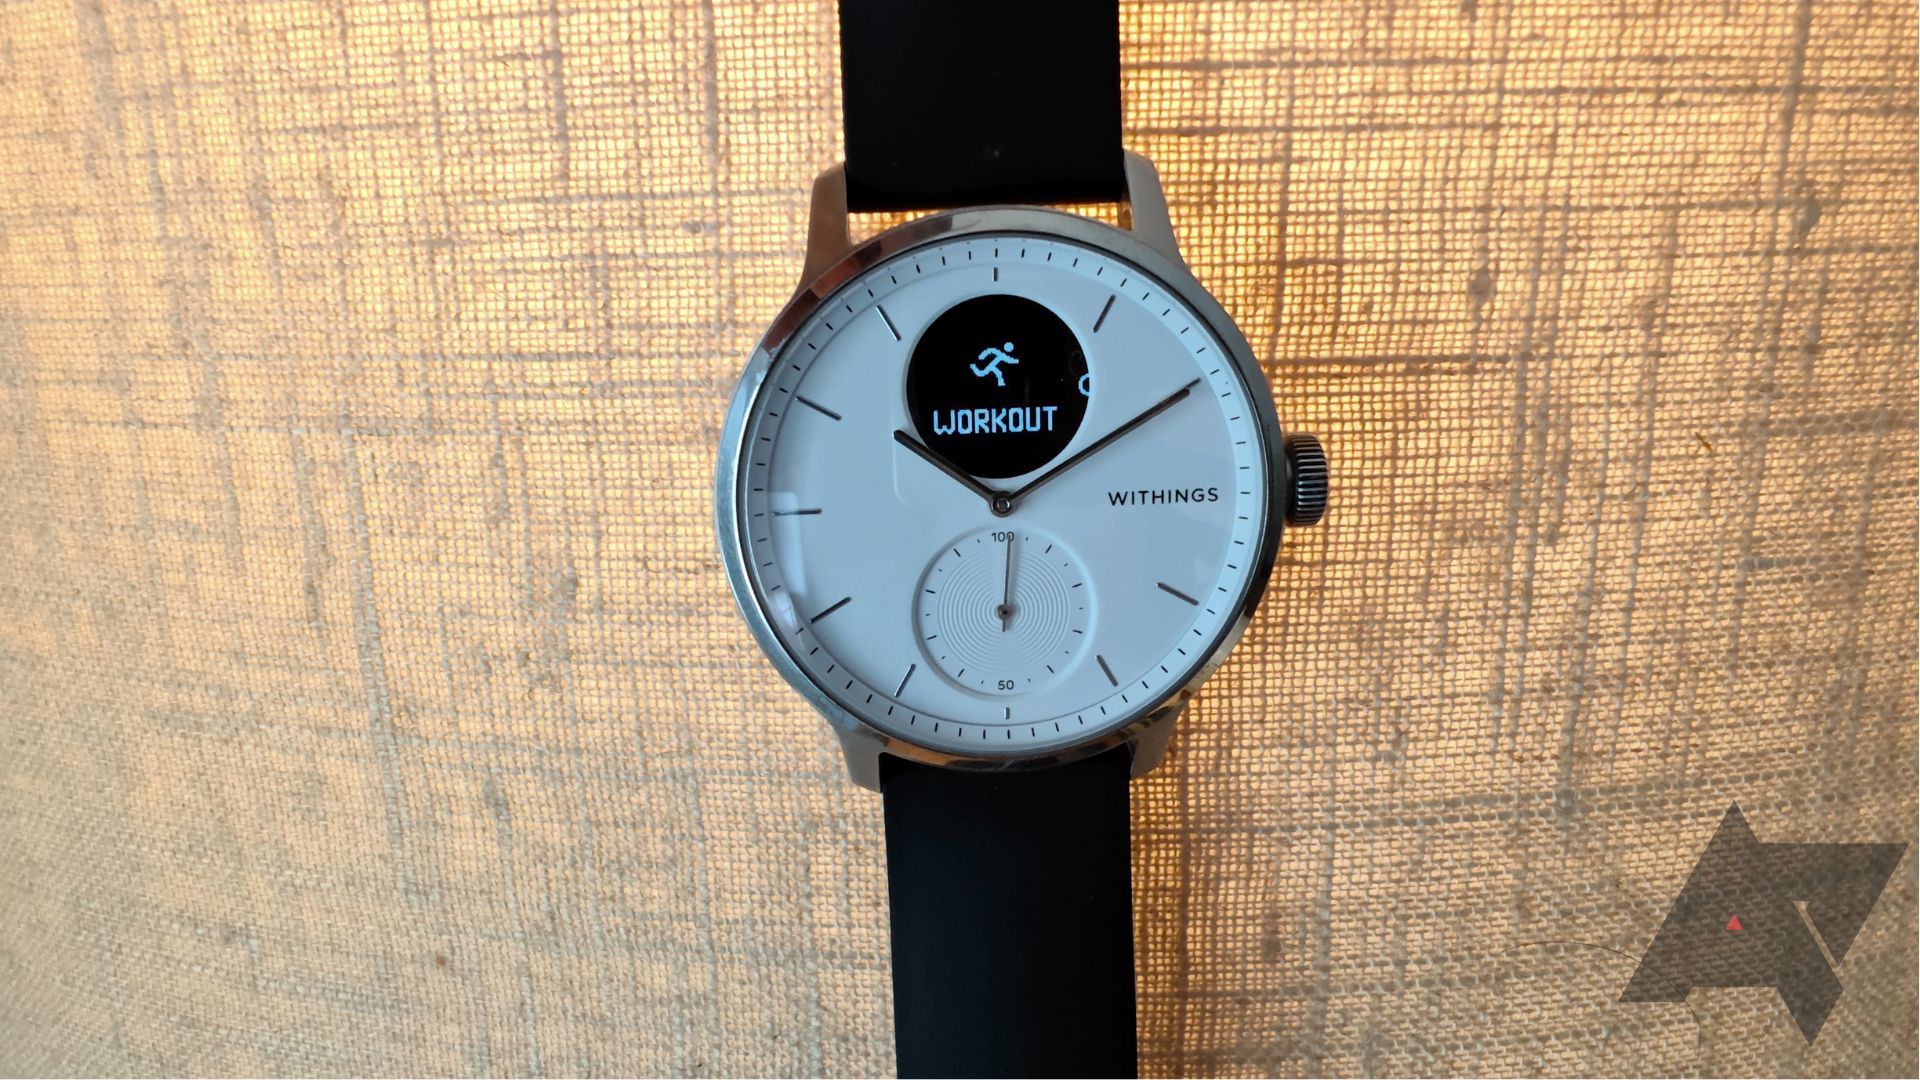 Withings ScanWatch Workout